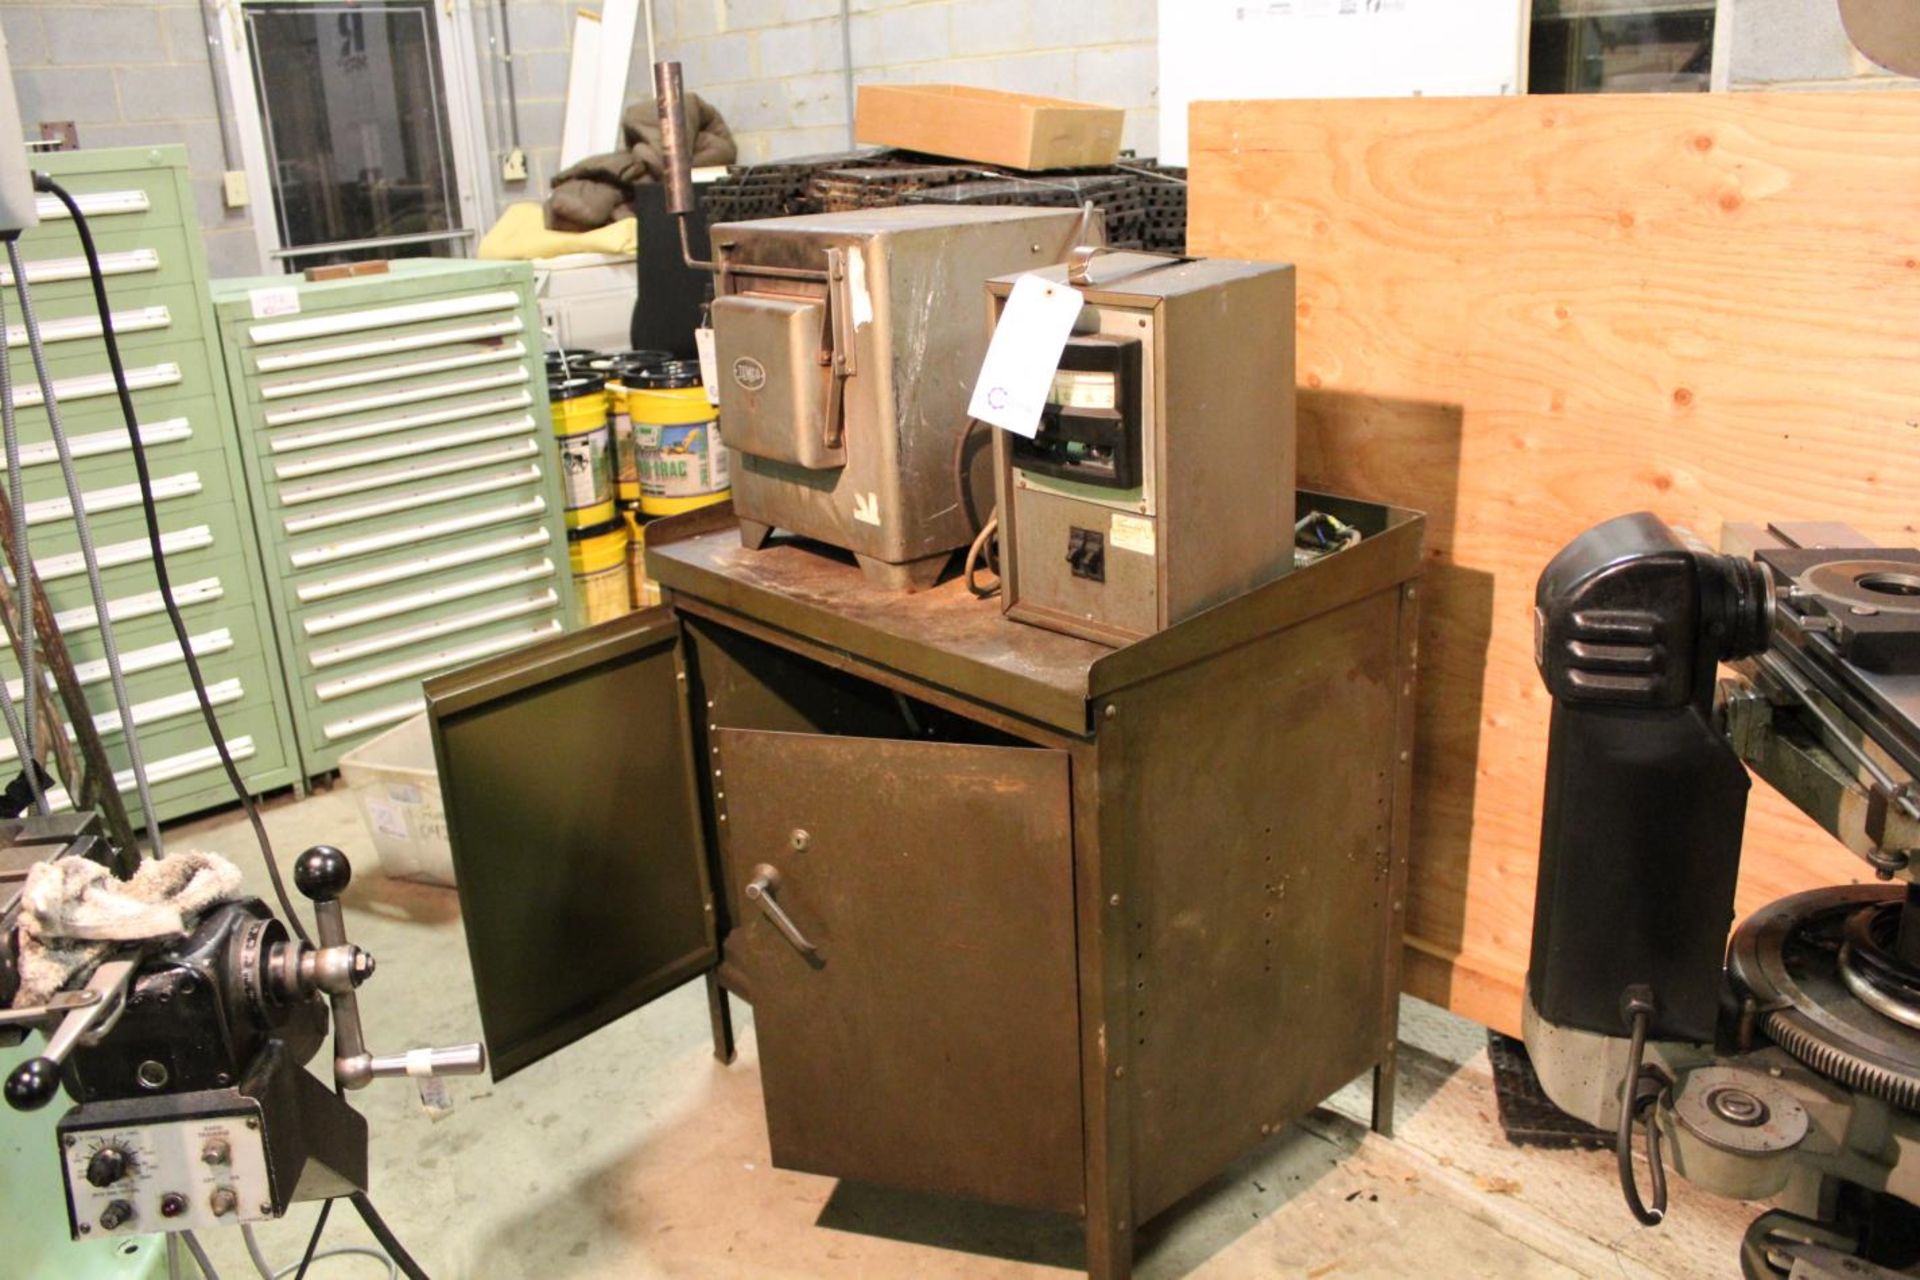 Temco 1620 Heat Treating Furnace With Cabinet, Stanley Grinder - Image 2 of 6